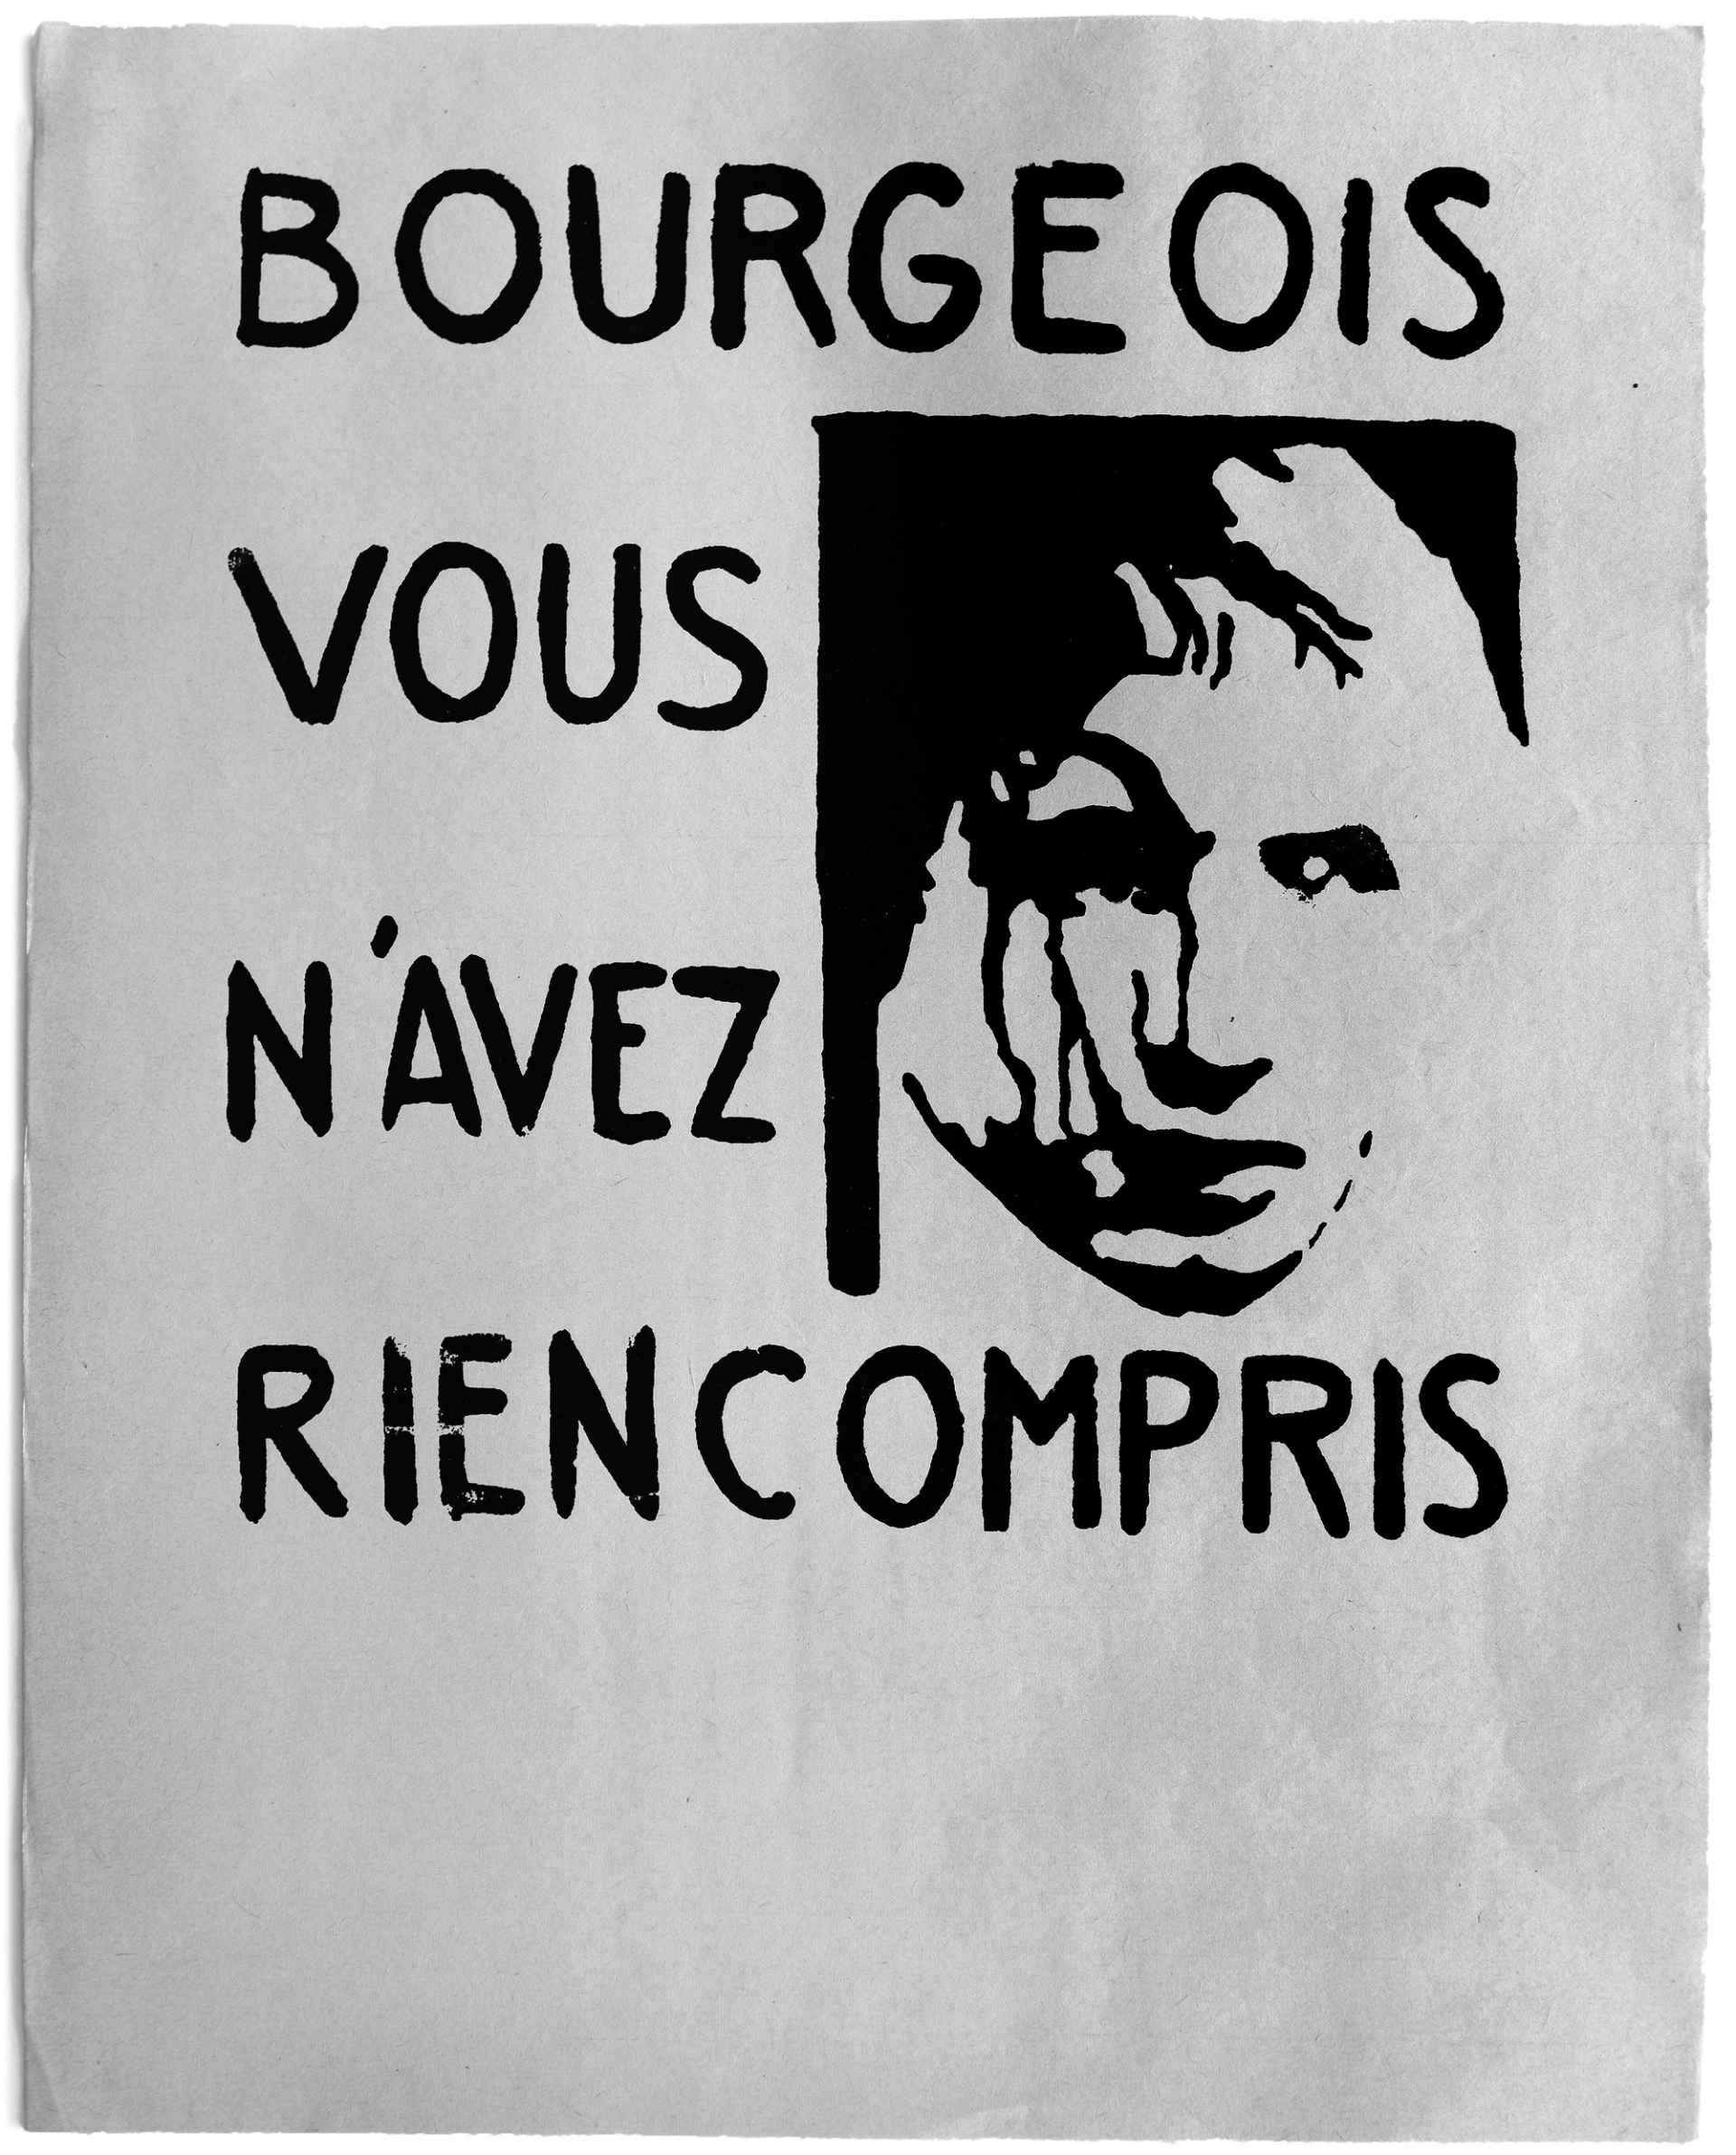 The insurgents' inner perspective of revolt counteracts the claim to create identity by crossing out all faces or by abstracting the singular face. The acting person becomes generic and thus stands for the revolutionary subject. 

Silkscreen poster, Atelier Populaire, Paris May 1968, inspired by the Situationists.